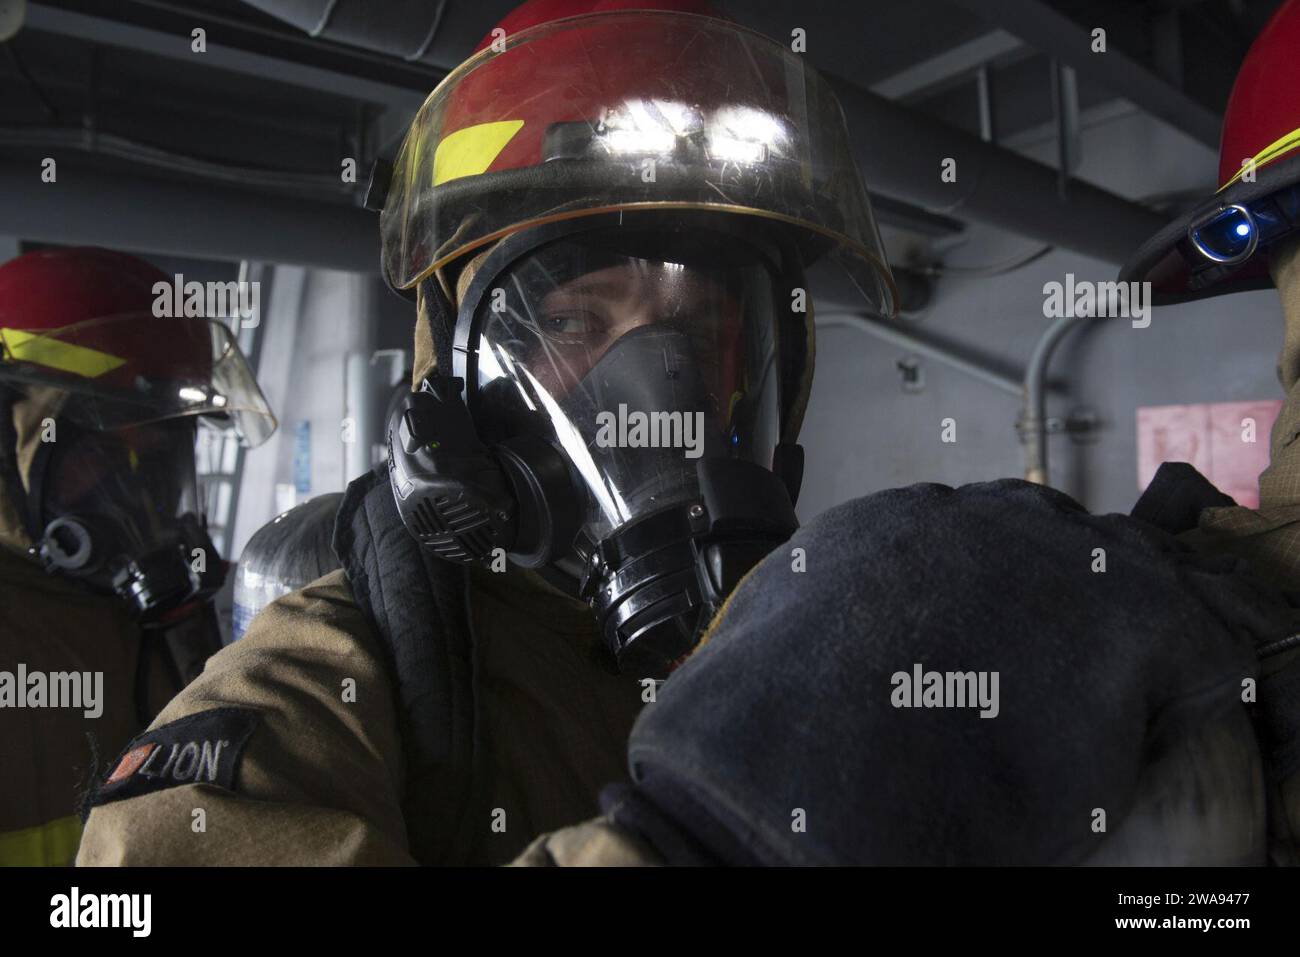 US military forces. 180421ZH683-166 ATLANTIC OCEAN (Apr. 21, 2018) Aviation Machinist's Mate Airman Brandon Parmalee mans a fire team on a weather deck during a general quarters drill aboard USS Harry S. Truman (CVN 75). Truman is currently deployed as part of an ongoing rotation of U.S. forces supporting maritime security operations in international waters around the globe. (U.S. Navy photo by Mass Communication Specialist 3rd Class Juan Sotolongo/Released) Stock Photo